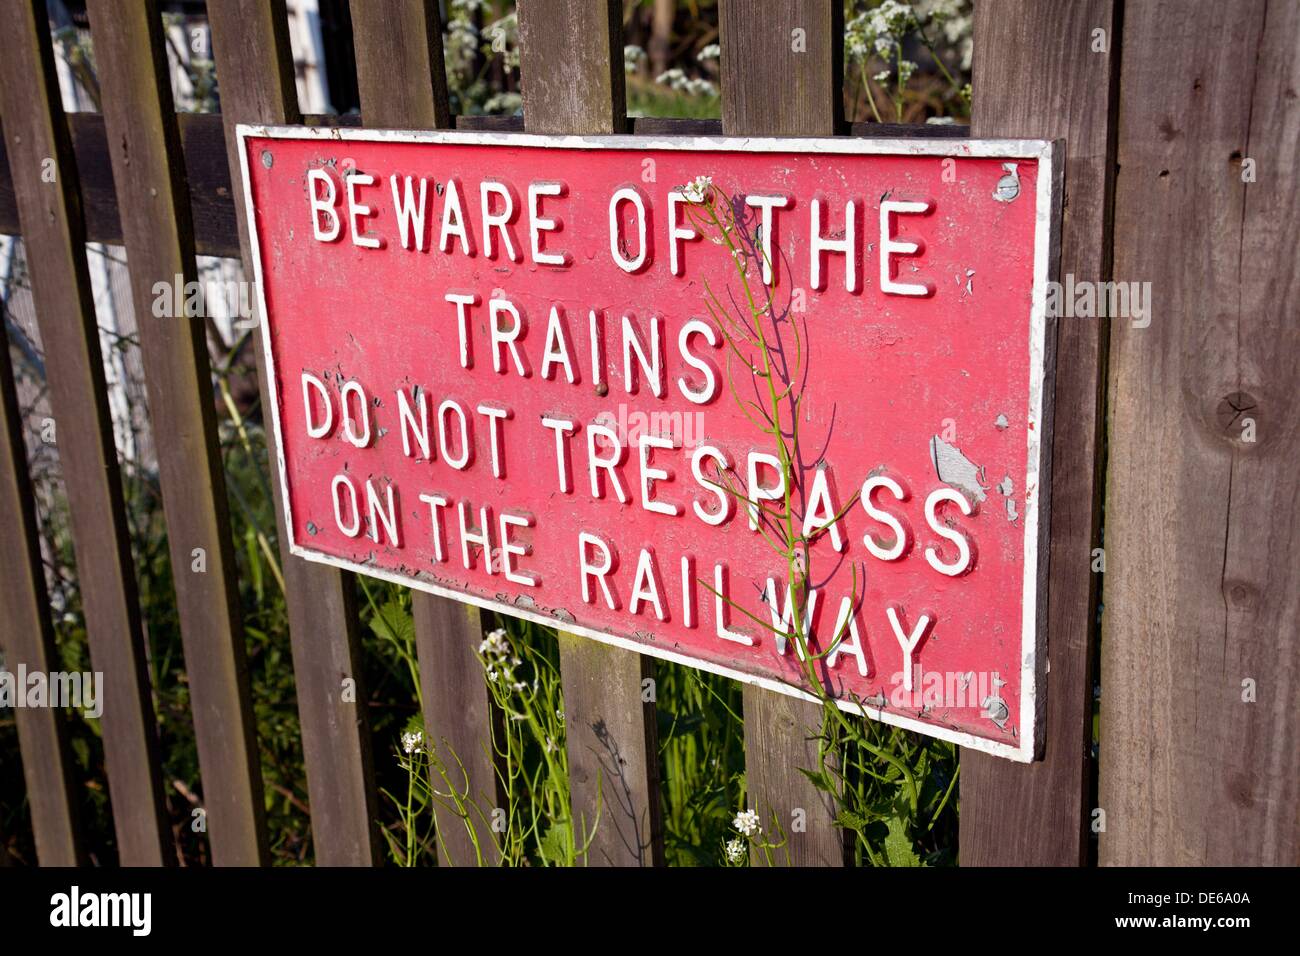 England Kent Rolvenden Station Warning notice ´Beware of the Trains Do not trespass on the Railway´ Stock Photo